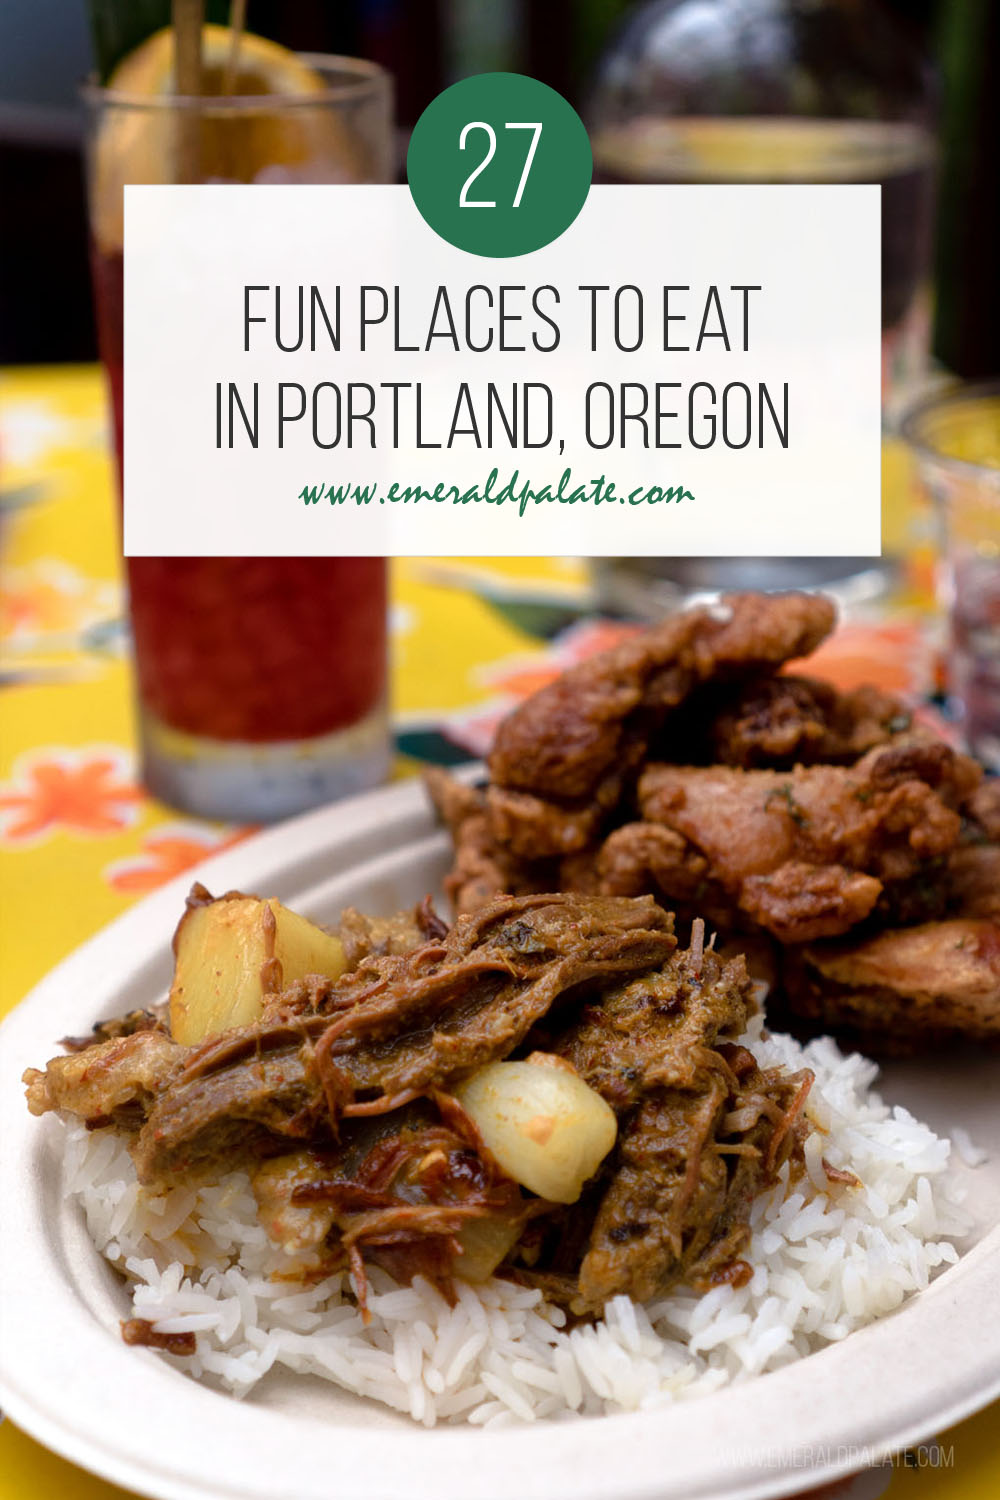 All the most fun places to eat in Portland, Oregon. If you are looking for the best PDX restaurants, use this as your ultimate guide to Portland eats!